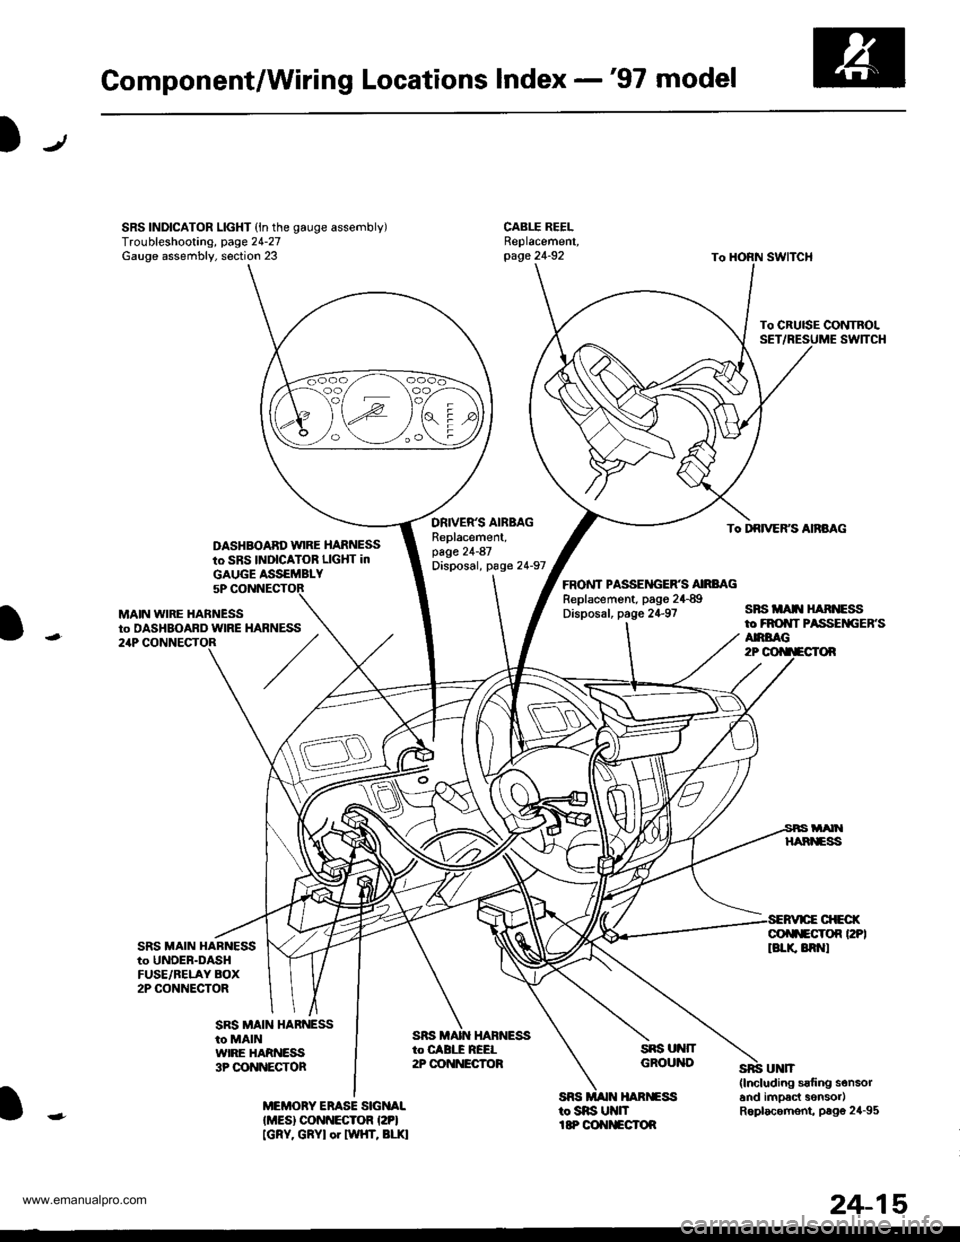 HONDA CR-V 1999 RD1-RD3 / 1.G Workshop Manual 
Component/Wiring Locations Index -97 model
SRS INDICATOR LIGHT (ln the gauge assembly)Troubleshooting, page 24-27Gauge assembly, section 23
DASHBOABD w|RE HARNESS
to SBS INDICATOR LIGHT in
DRIVERS 